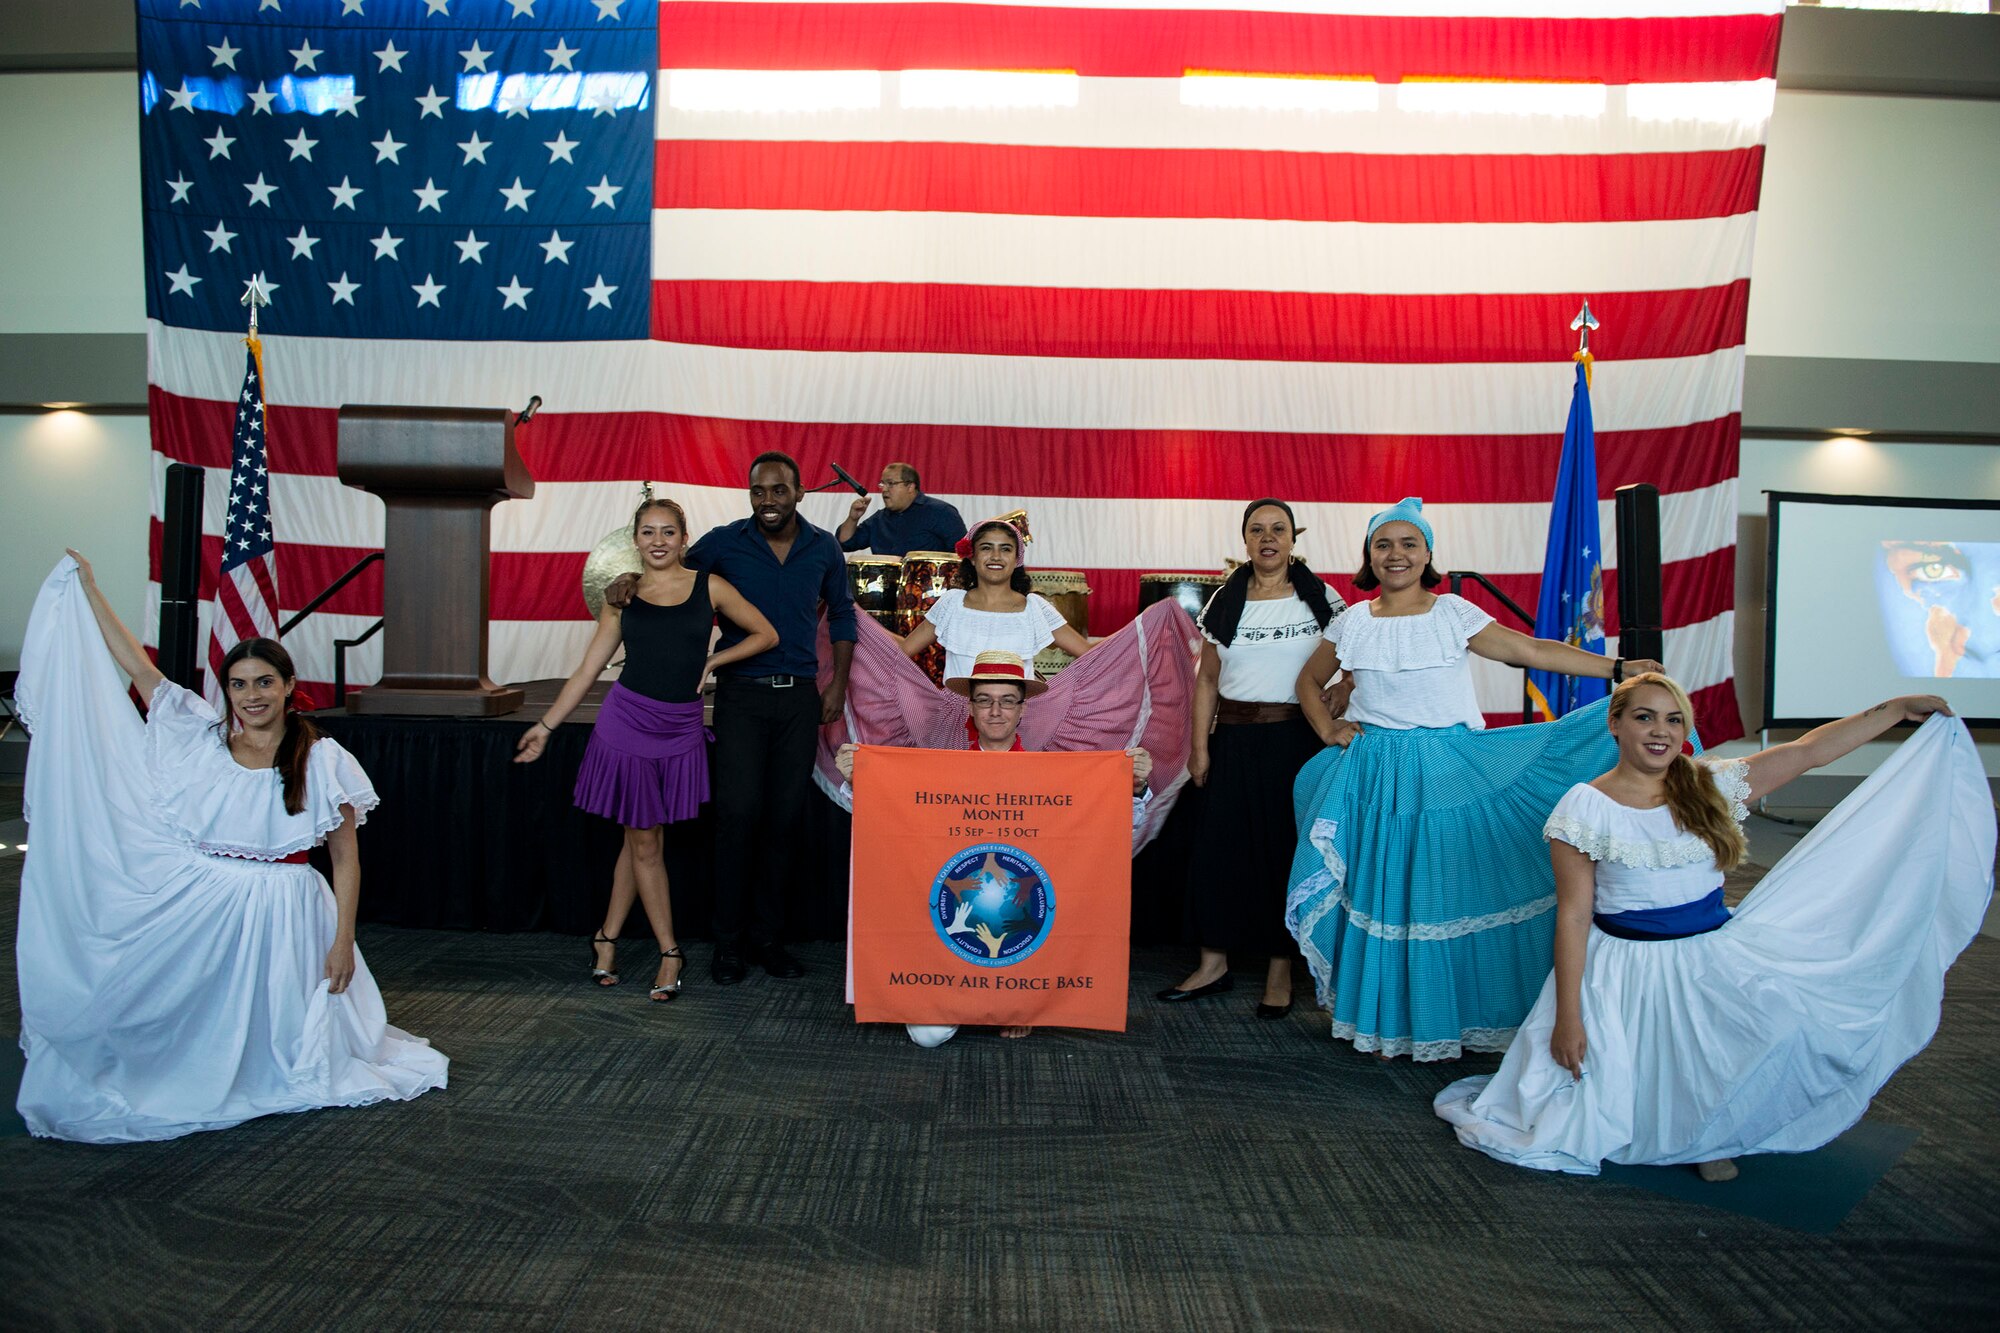 Performers pose for a photo during the 23d Wing Diversity Day, Sept. 14, 2018, at Moody Air Force Base, Ga. Diversity Day honored the cultures of all groups and organizations observed by the Department of Defense using forms of expression such as poems and native dances. The theme of this year was ’Many Cultures, One Voice: Stronger Through Inclusion And Equality’. (U.S. Air Force photo by Airman 1st Class Erick Requadt)